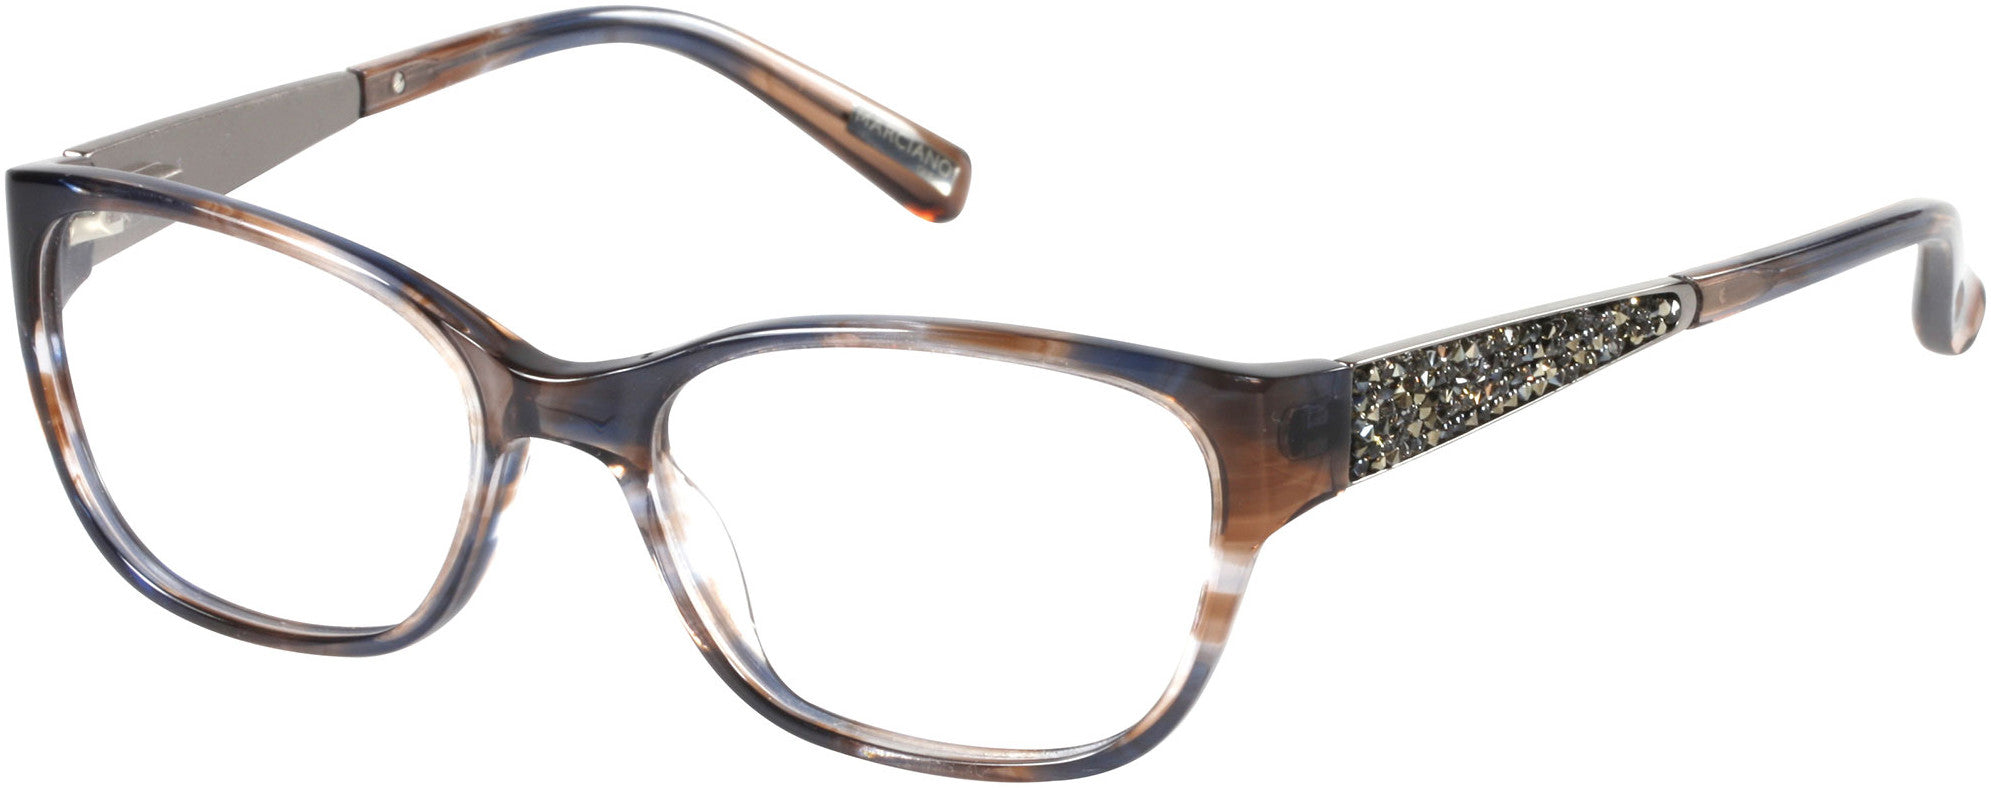 Guess By Marciano GM0243 Square Eyeglasses E50-E50 - Brown / Blue